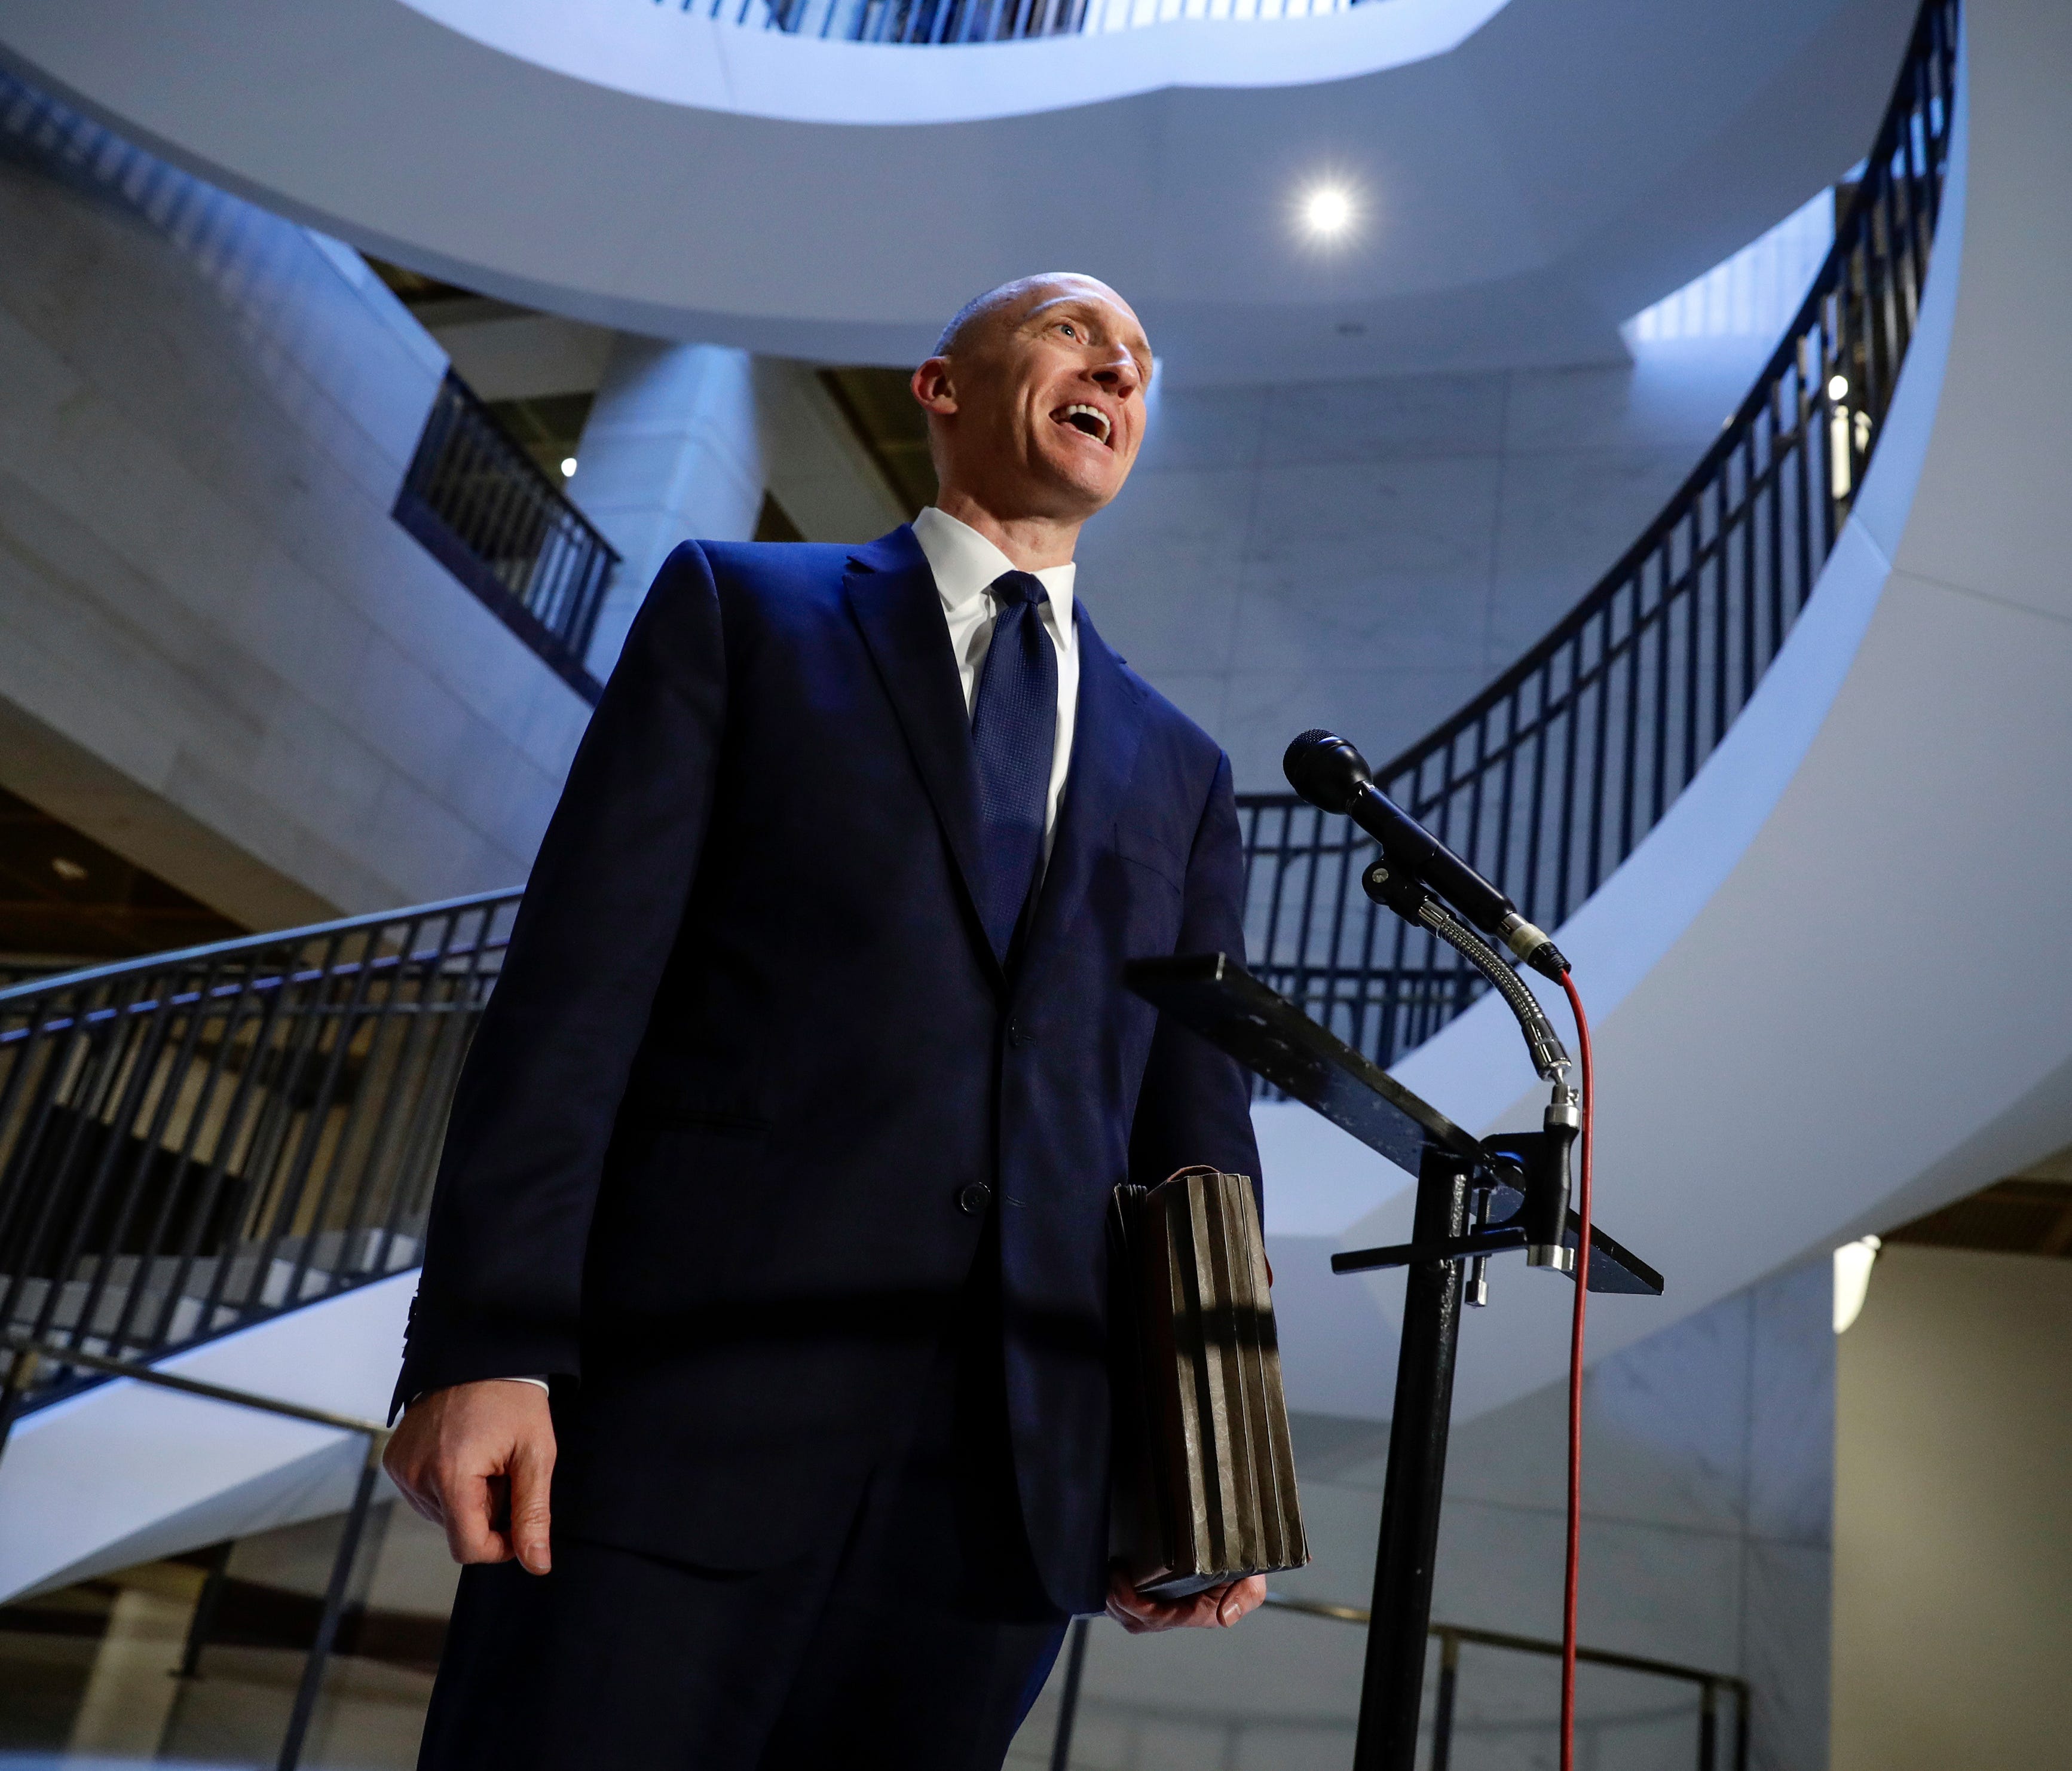 Carter Page, a foreign policy adviser to Donald Trump's 2016 presidential campaign, speaks with reporters following a day of questions from the House Intelligence Committee, on Capitol Hill in Washington, Thursday, Nov. 2, 2017.